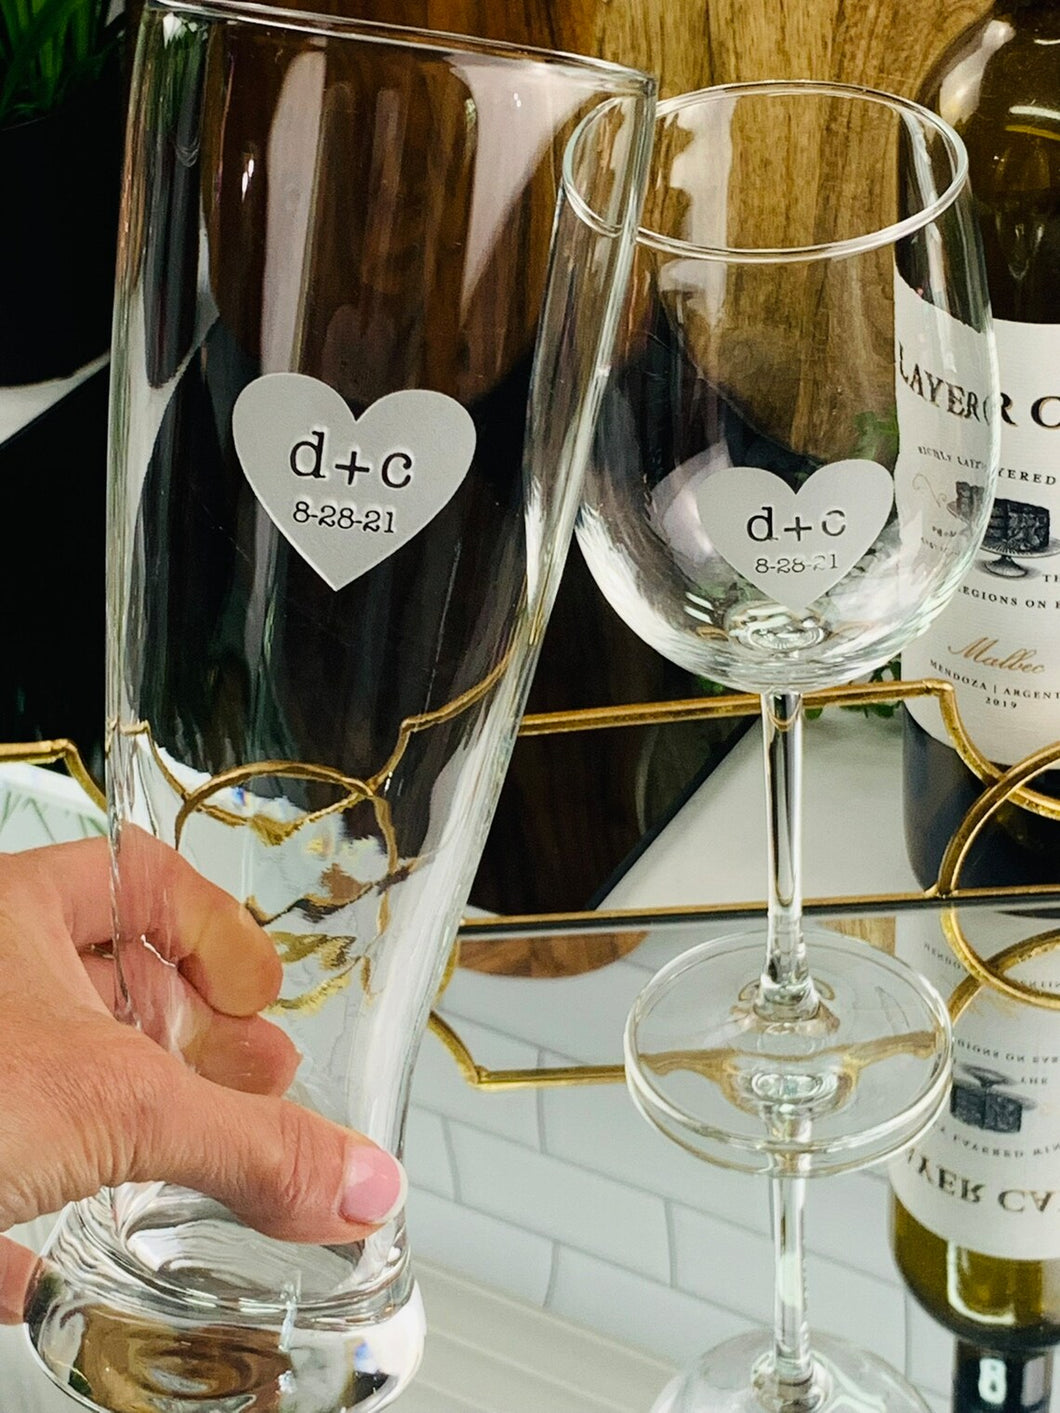 Mix and Match Pilsner| Wine Forever Stamped in My Heart Glasses